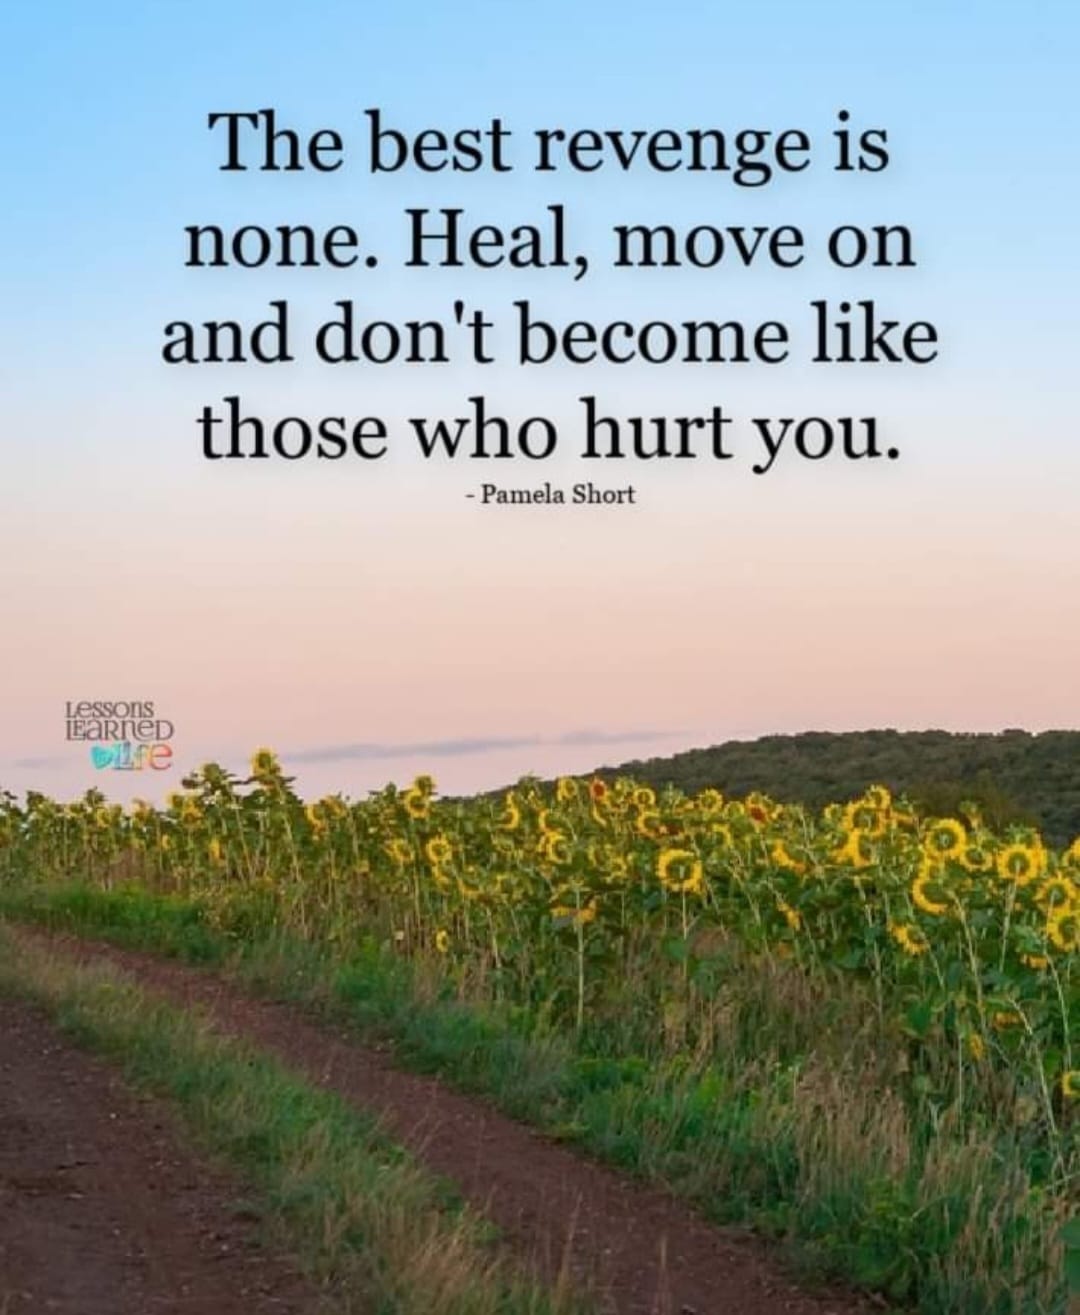 The best revenge is none. Heal, move on and don't become like those who hurt you.